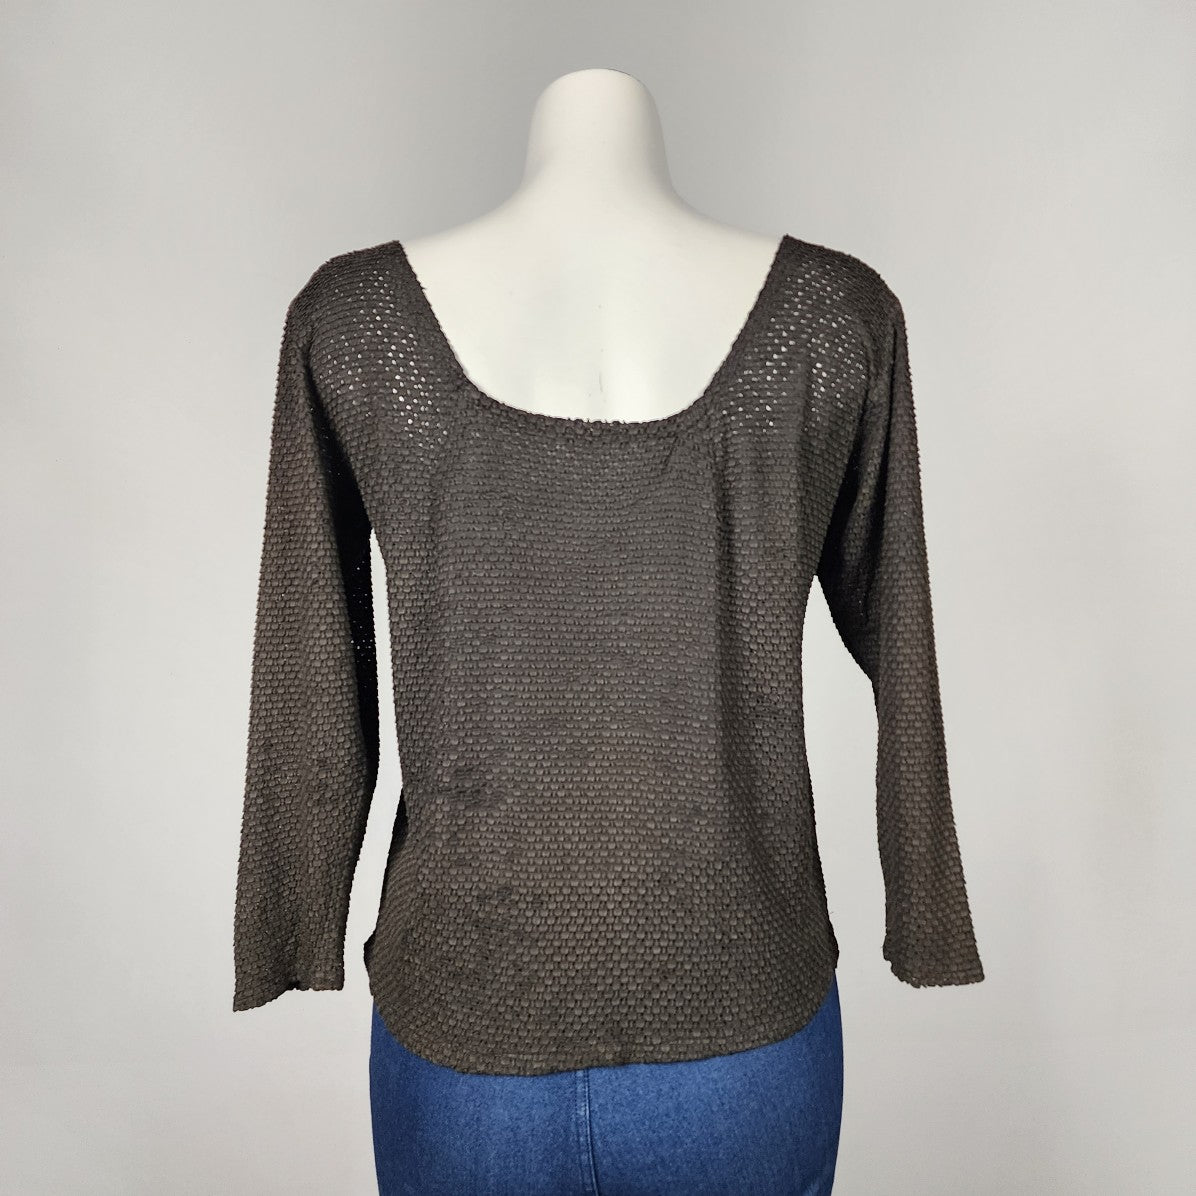 Vintage Brown Long Sleeve Boat Neck Top Size M